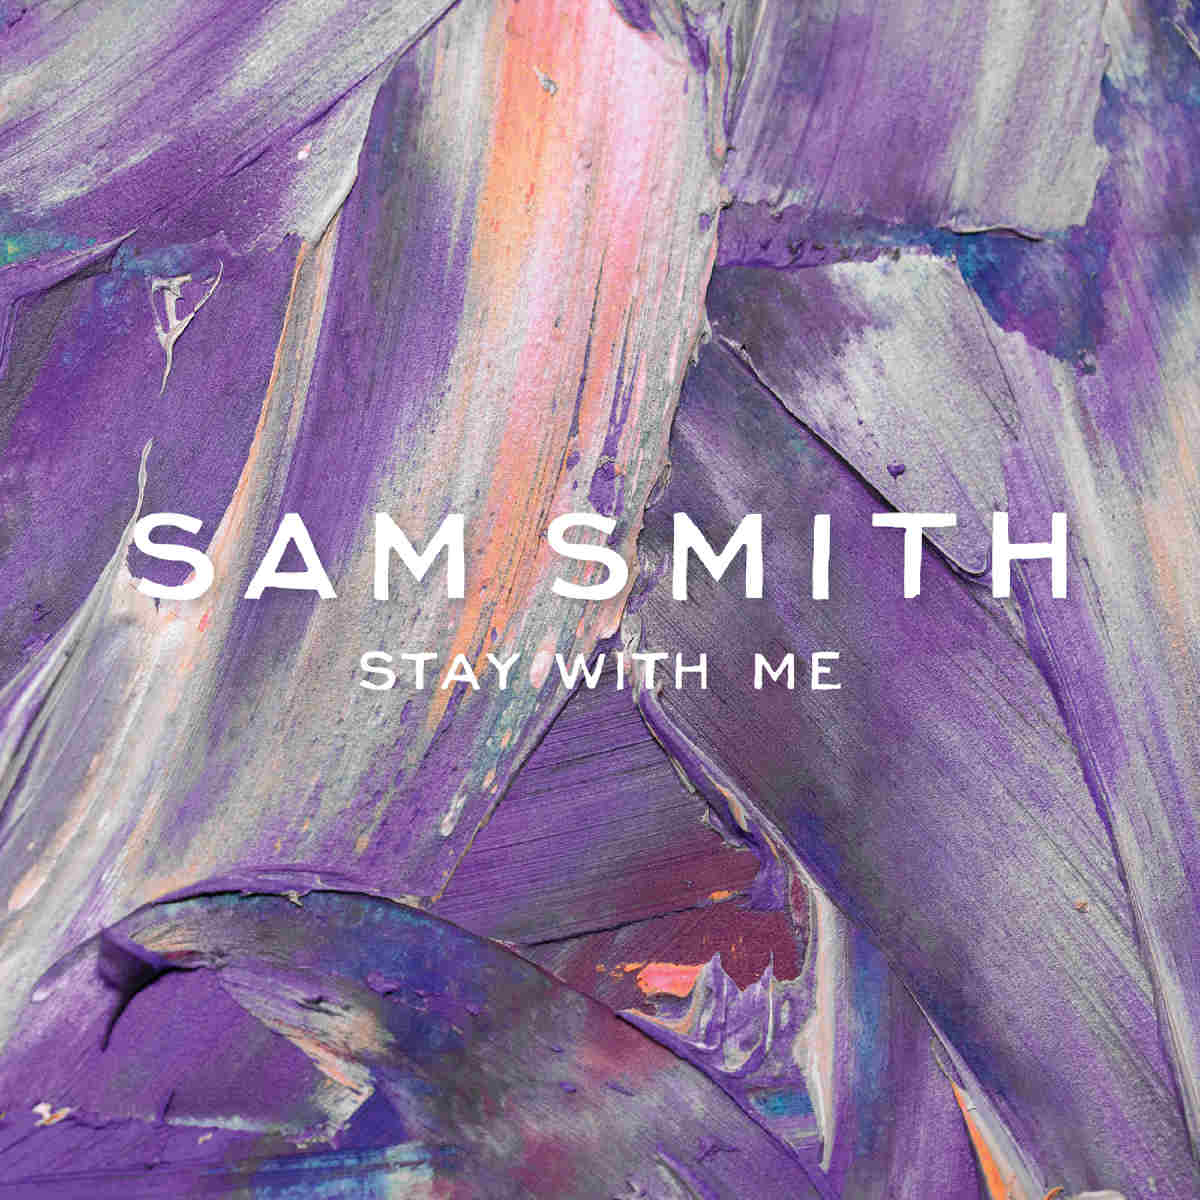 Stay With Me[Darkchild Version] by Sam Smith, Mary J. Blige